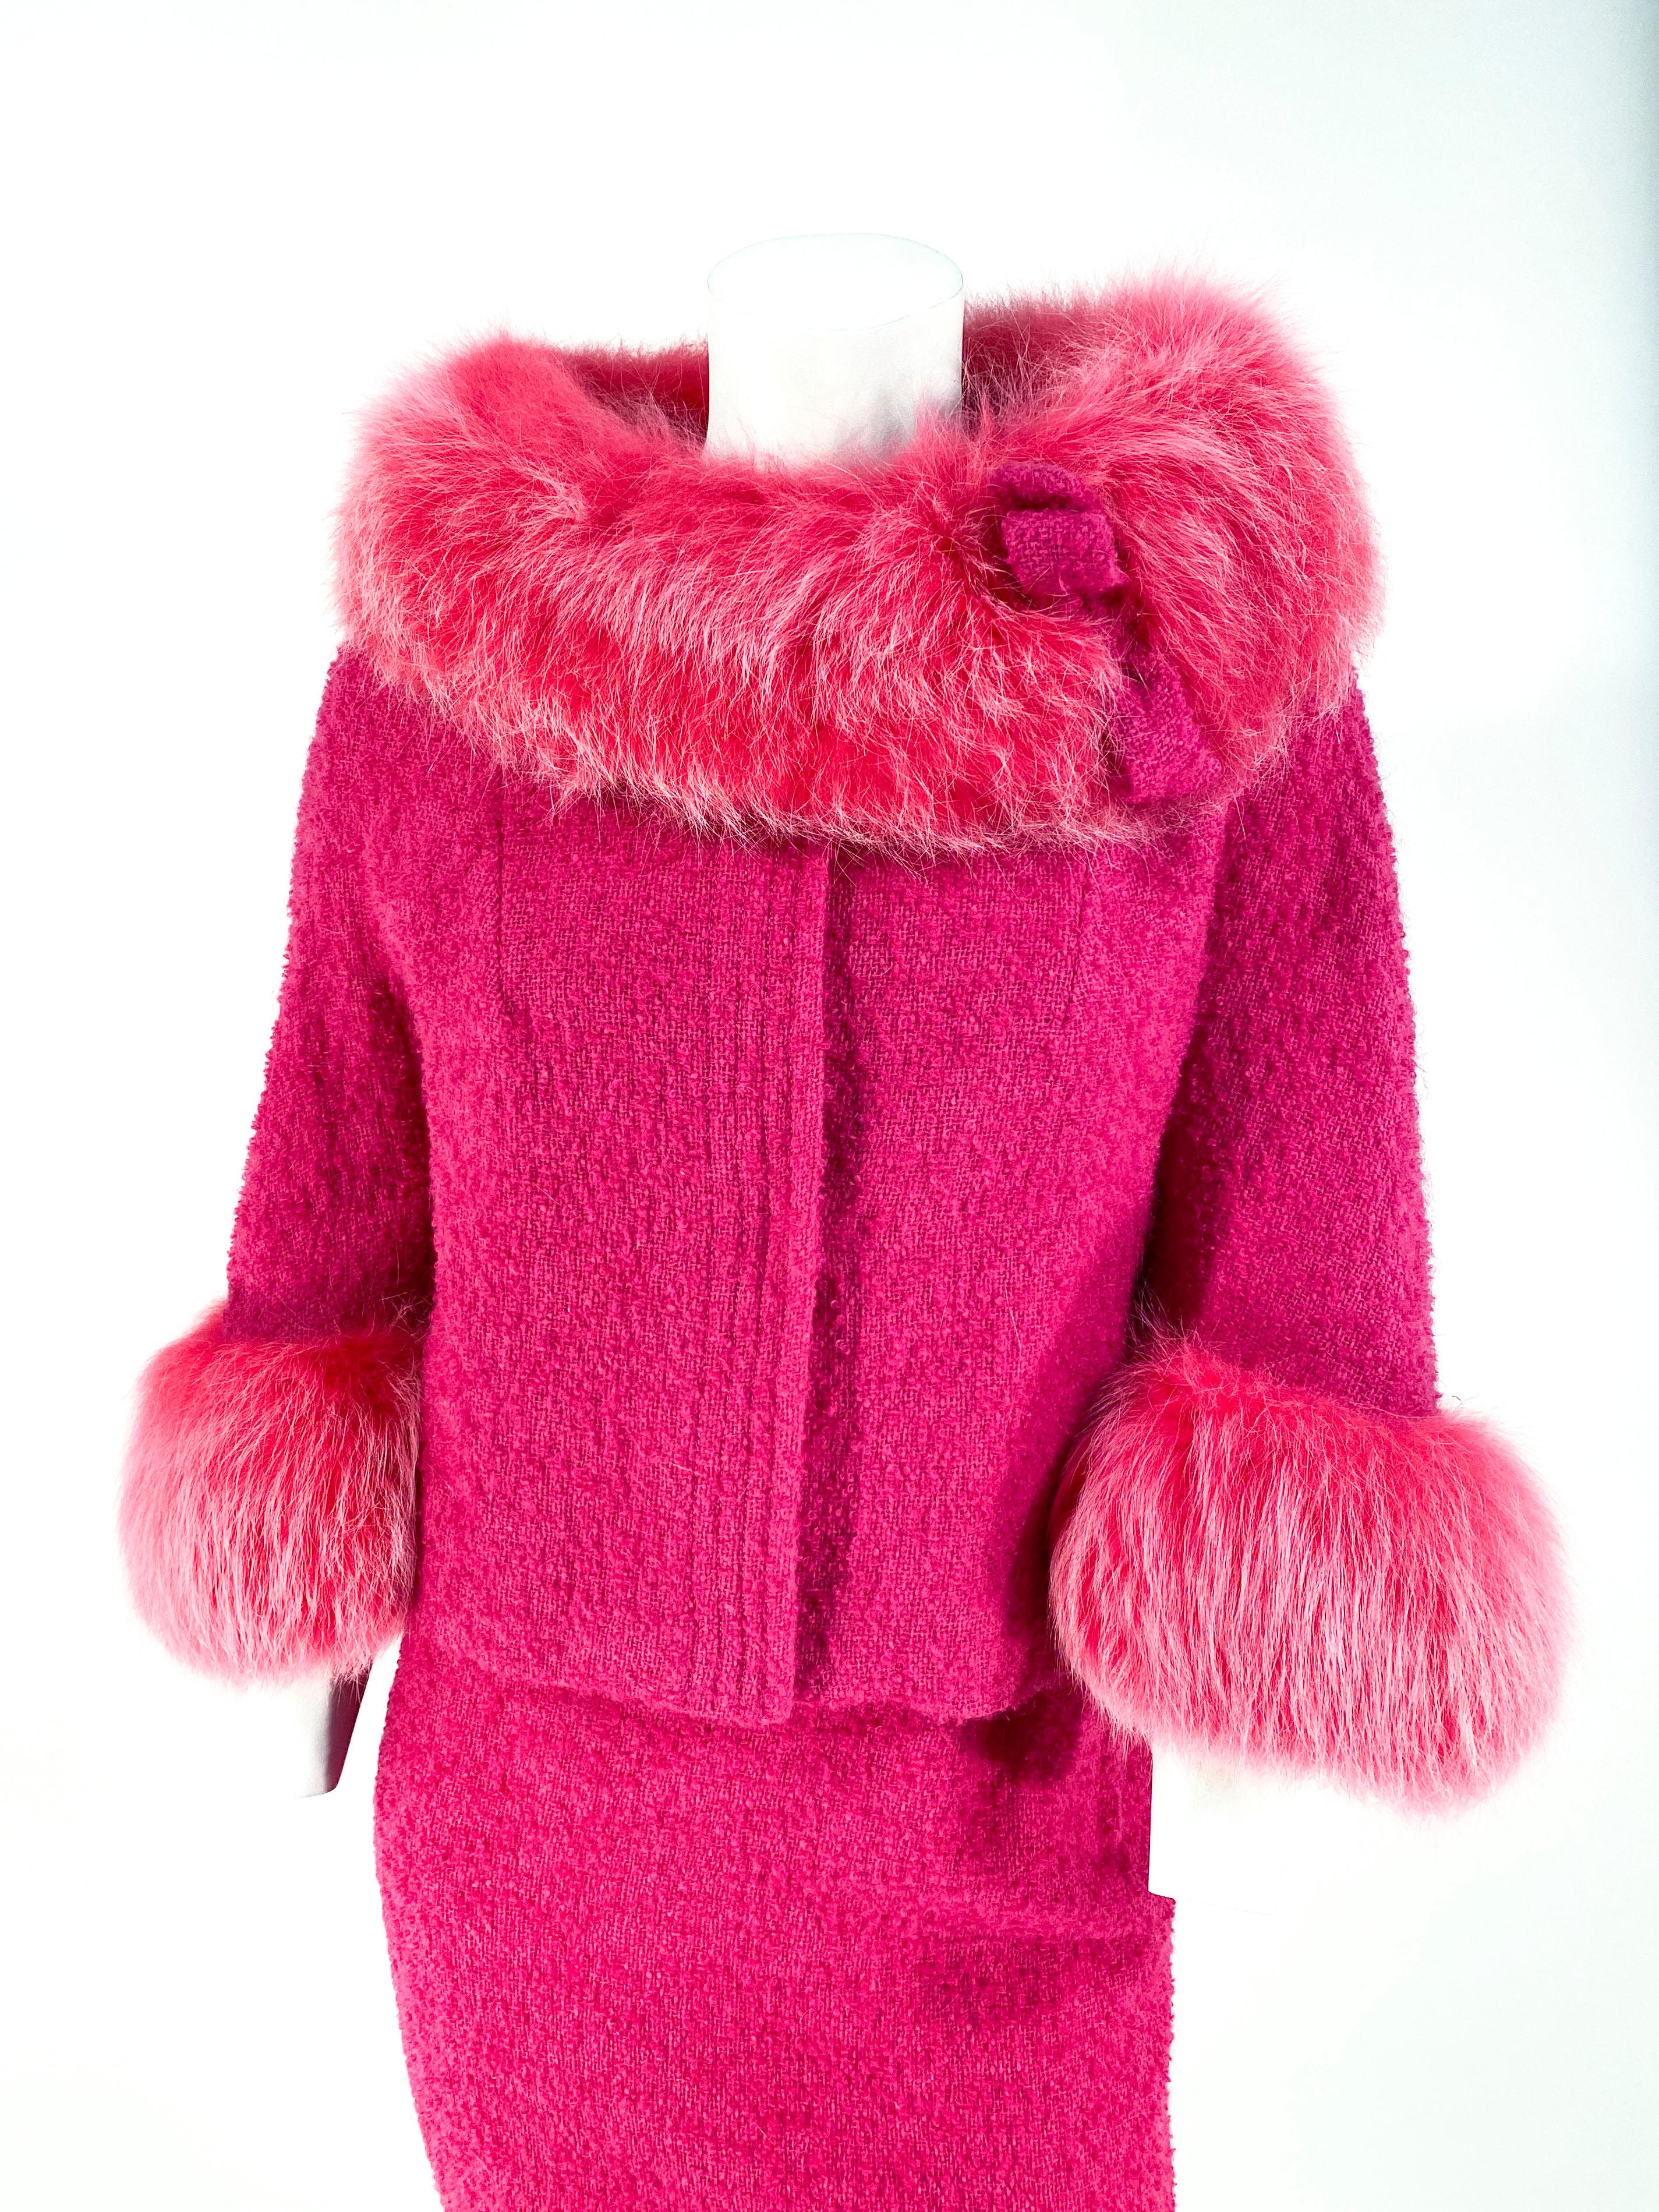 1960s custom made and custom dyed hot pink mohair suit with fox collar and cuffs. The full fox collar has a mohair bow detail to match the rest of the suit. The hidden snap closures are hand-covered with matching silk and the skirt is fully-lined